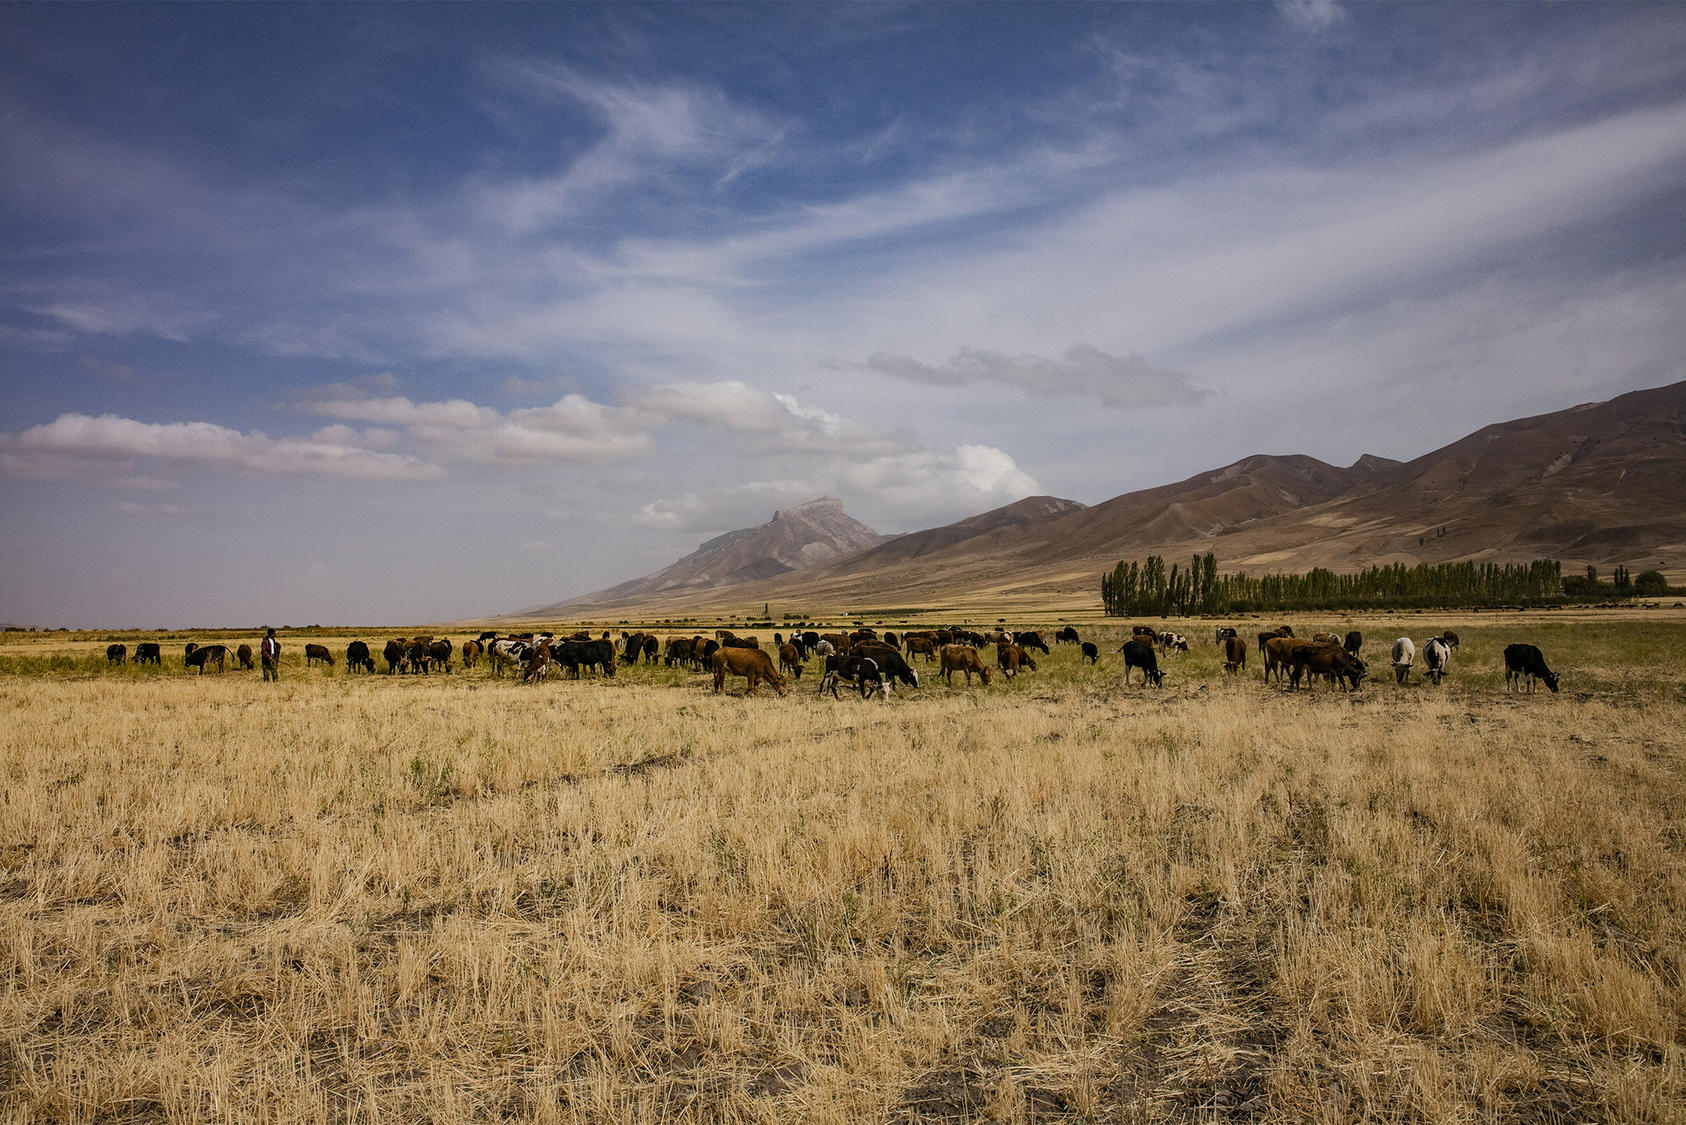 Cattle along the highway between Kalai-Khumb and Dushanbe in Tajikistan, Oct. 3, 2019. (Tony Cenicola/The New York Times)